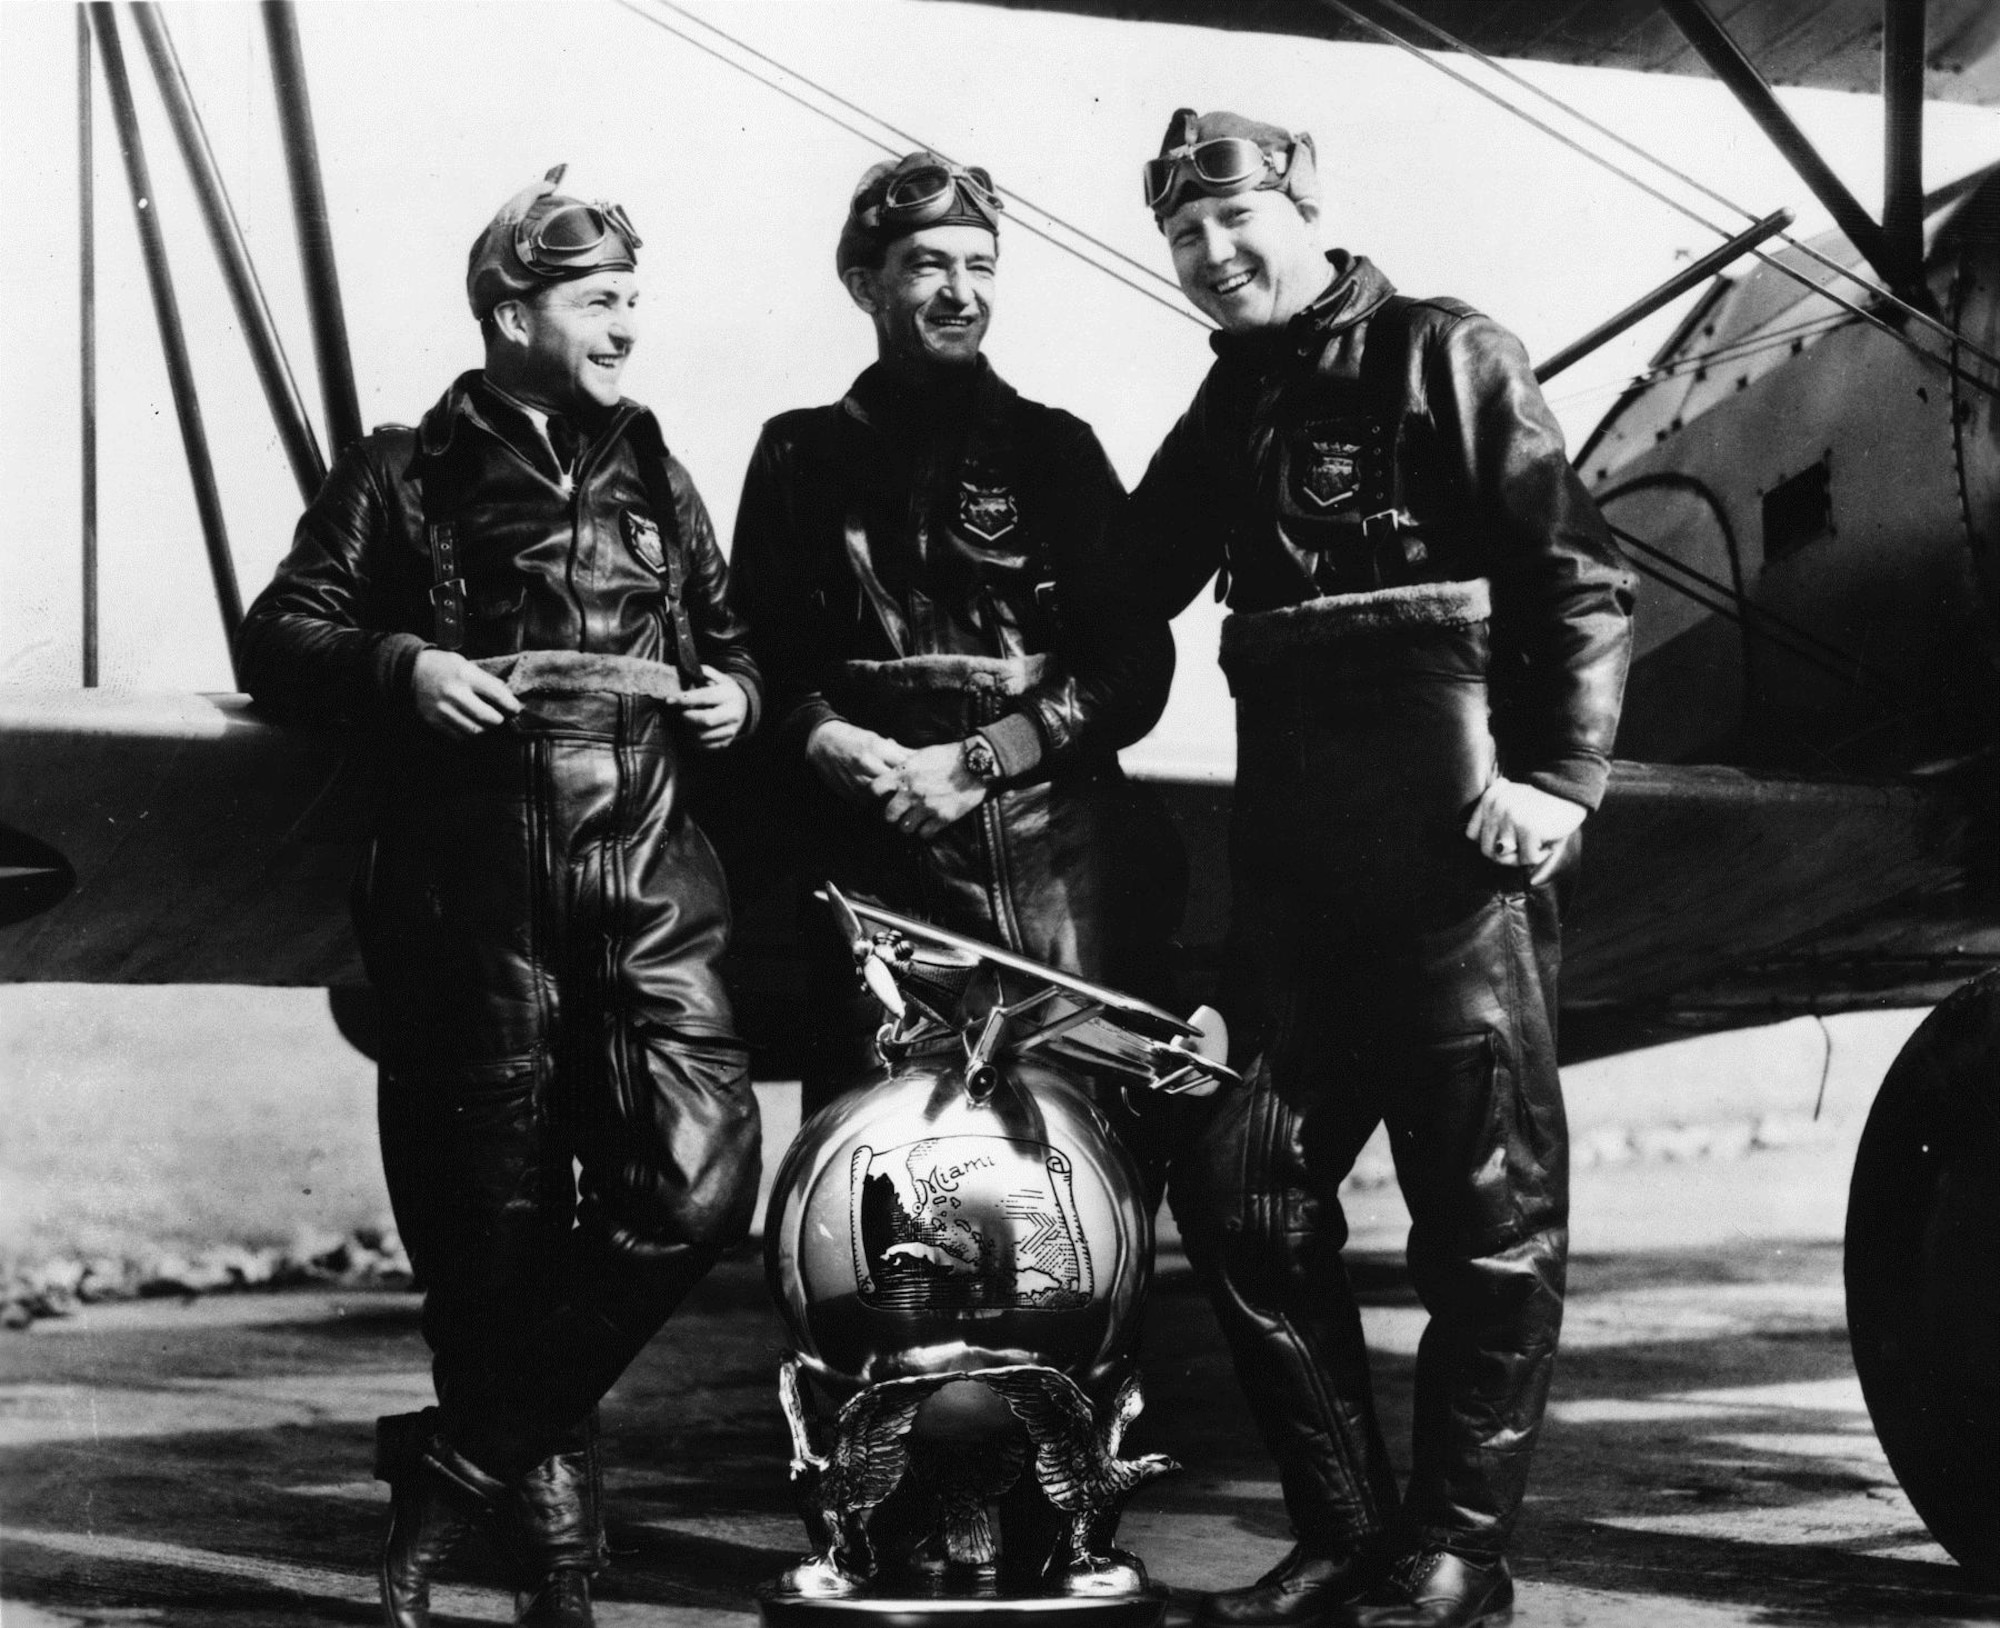 Men on the Flying Trapeze, an Army flight demonstration team organized by then-Capt. Claire Chennault in 1932, at one time included two enlisted pilots who continued to serve after their release from active duty as reserve officers. From left are Sgt. William C. McDonald, Capt. Chennault and Sgt. John H. Williamson. Later, each helped train China's air force prior to World War II. SSgt. Ray Clinton also flew solo stunt and backup for the team. (U.S. Air Force photo)